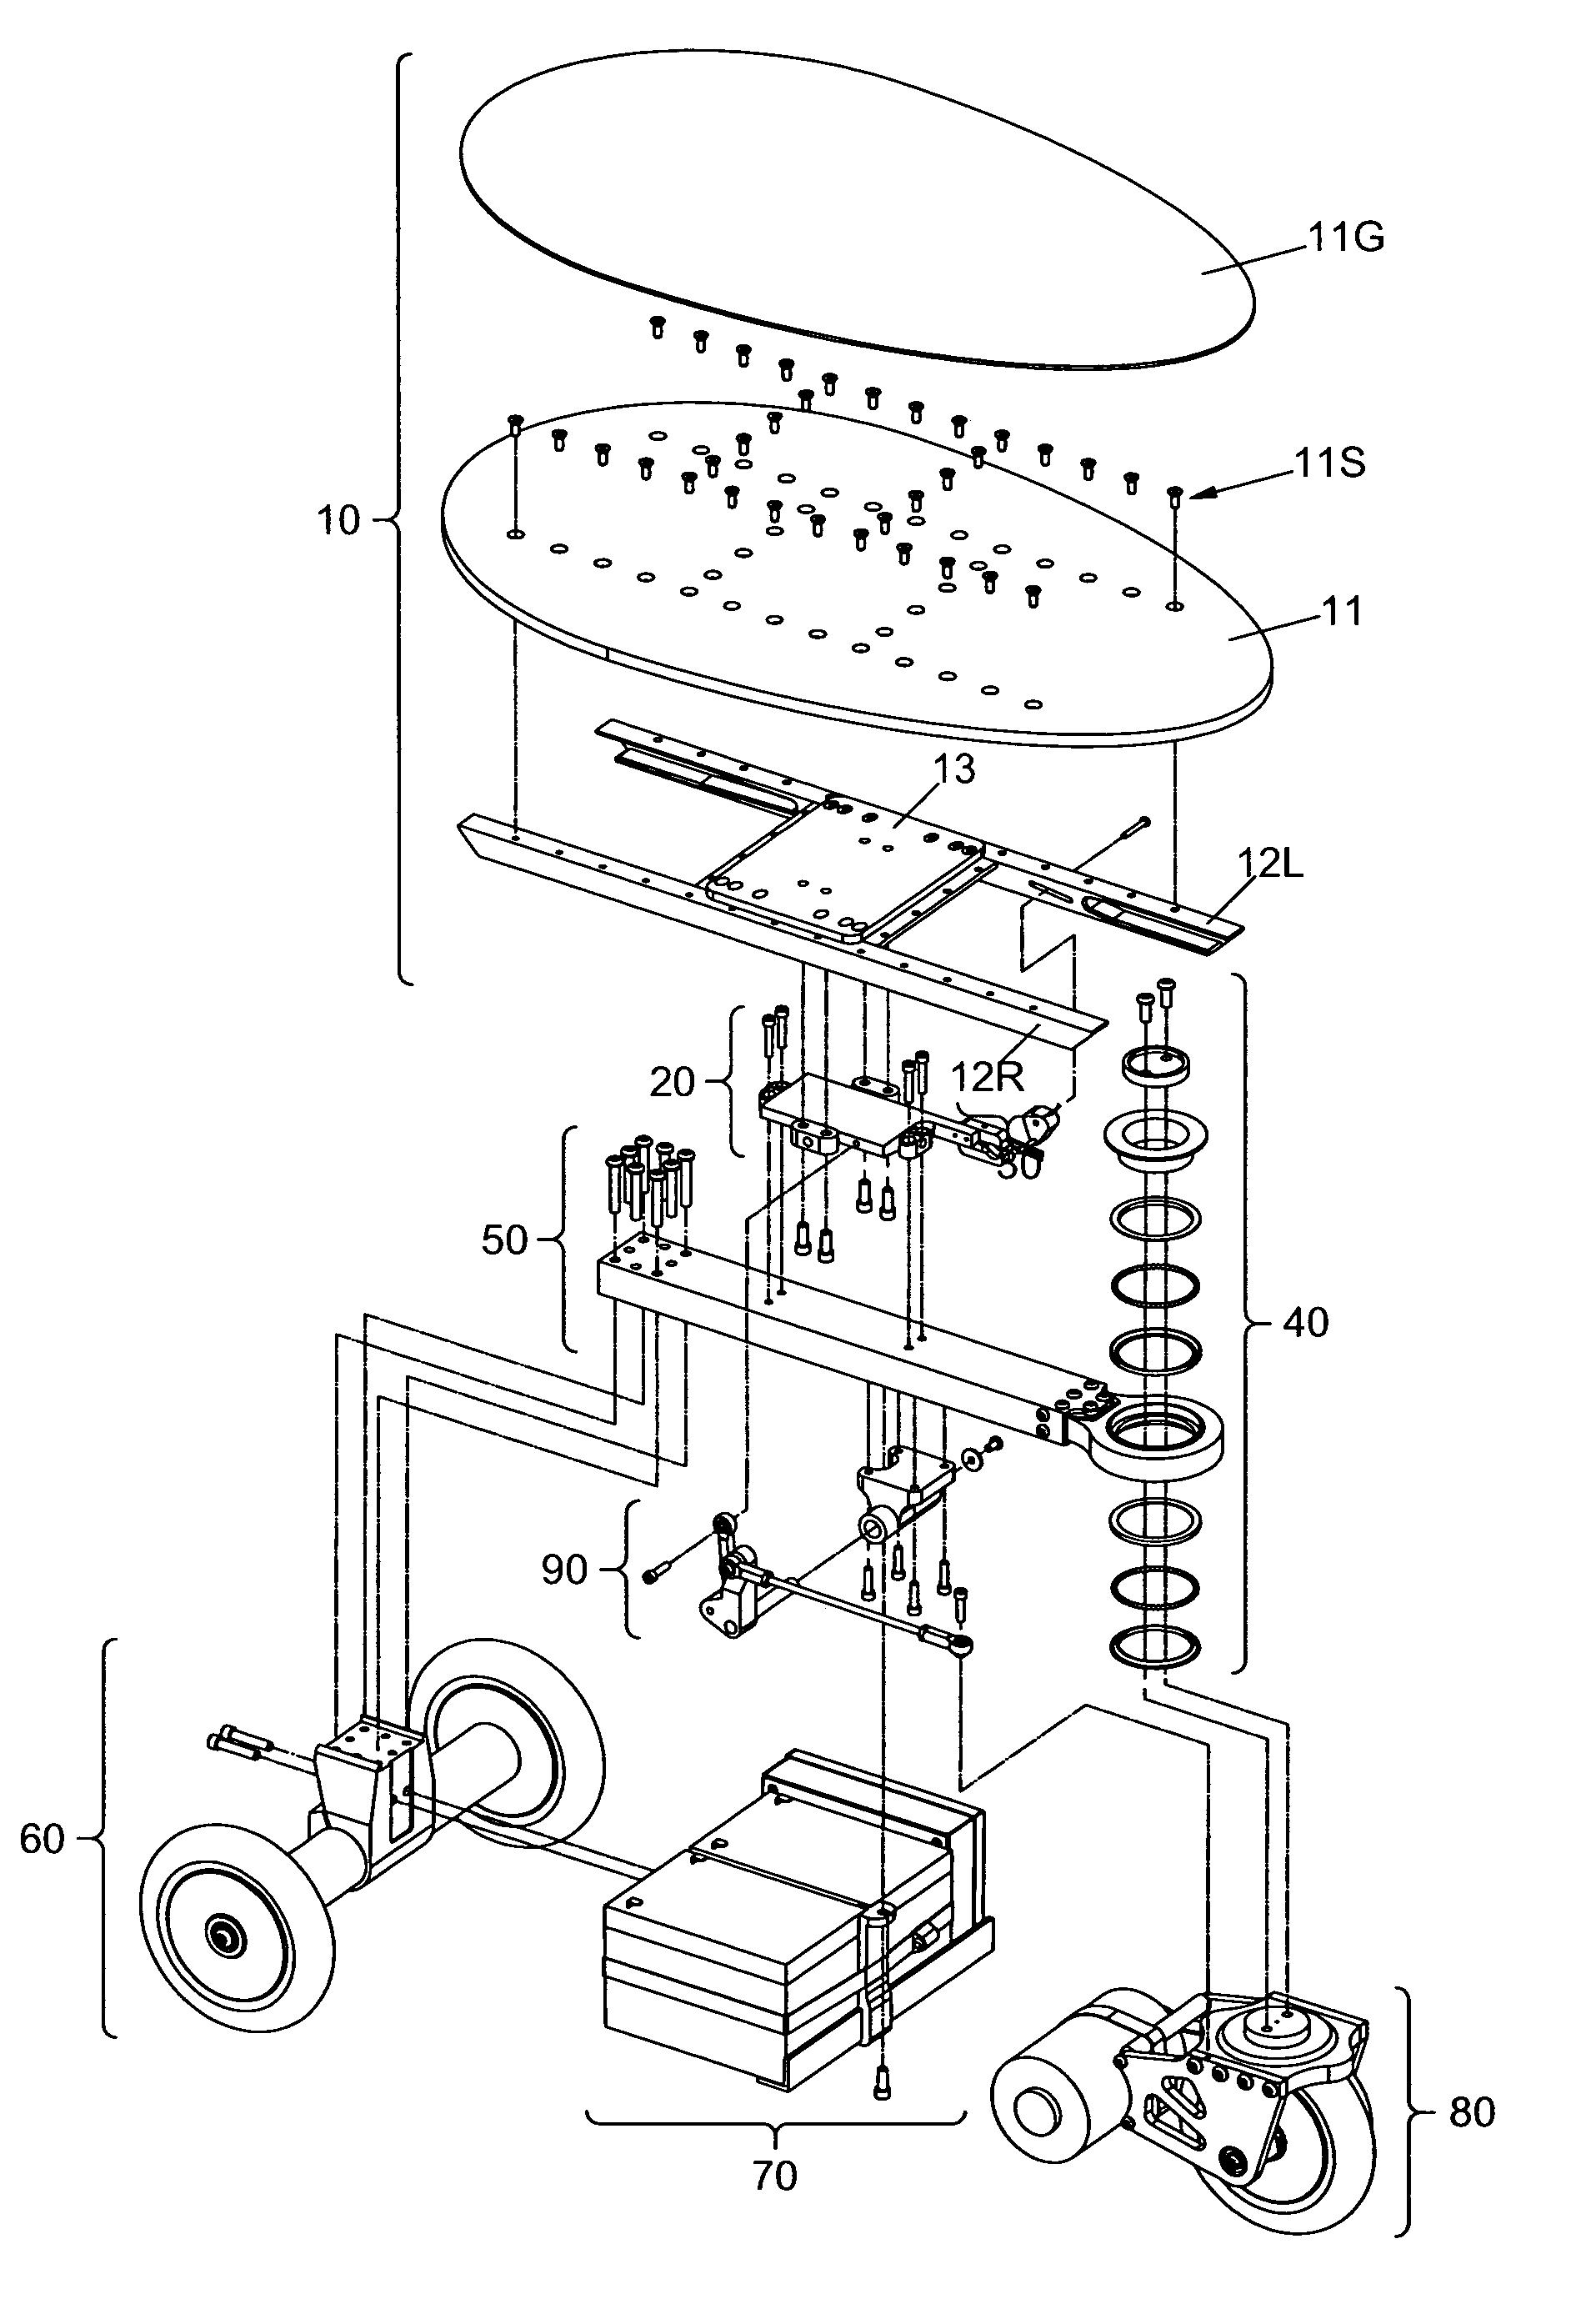 Foot-controlled motorized vehicle